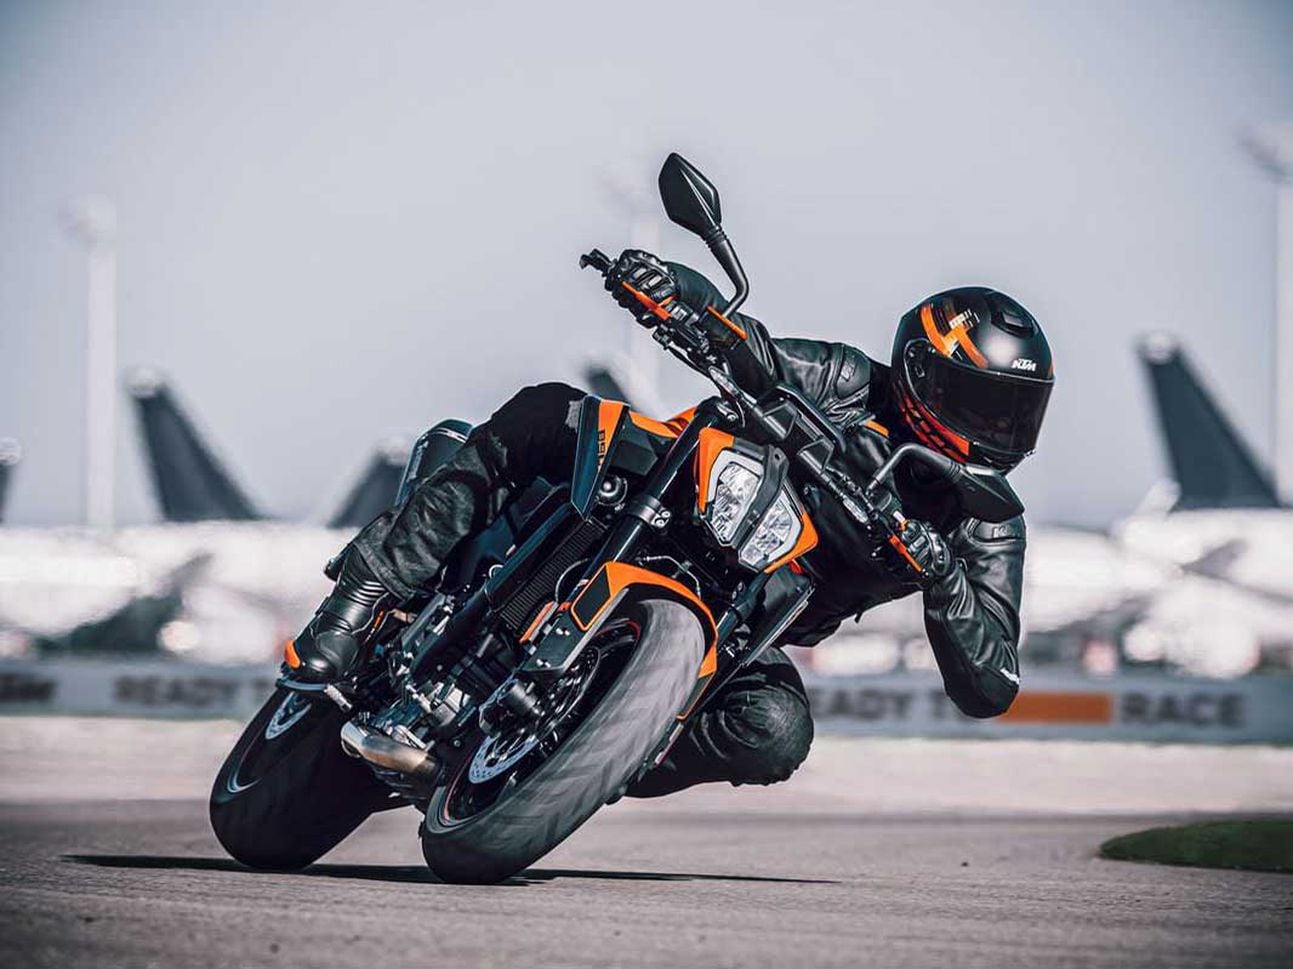 Although it isn’t KTM’s biggest or baddest naked, the 890 Duke has a wild side that would make most of us blush.